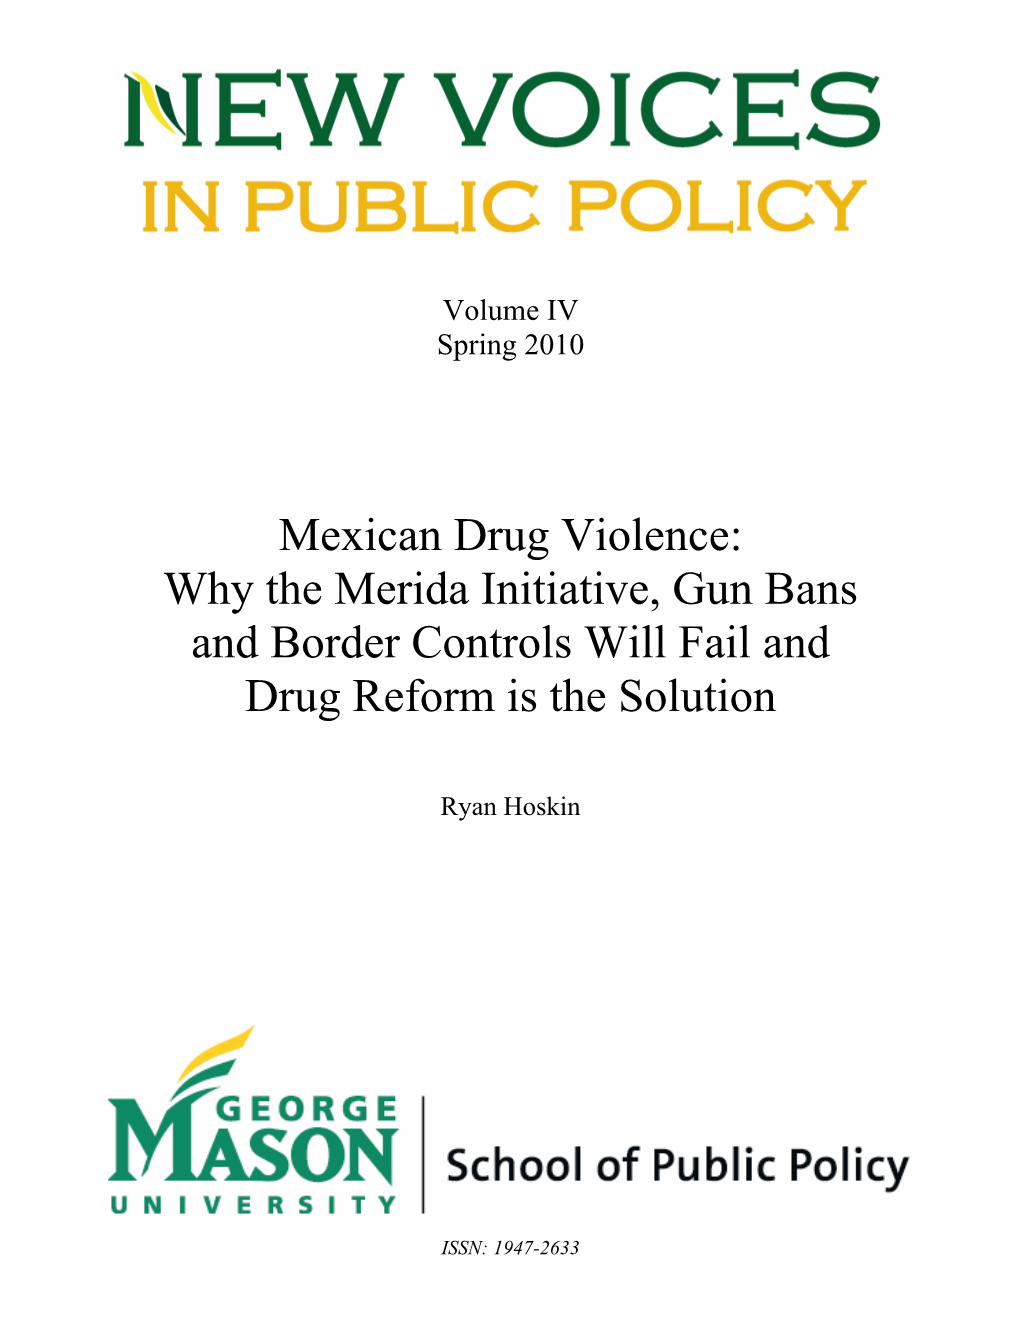 Mexican Drug Violence: Why the Merida Initiative, Gun Bans and Border Controls Will Fail And